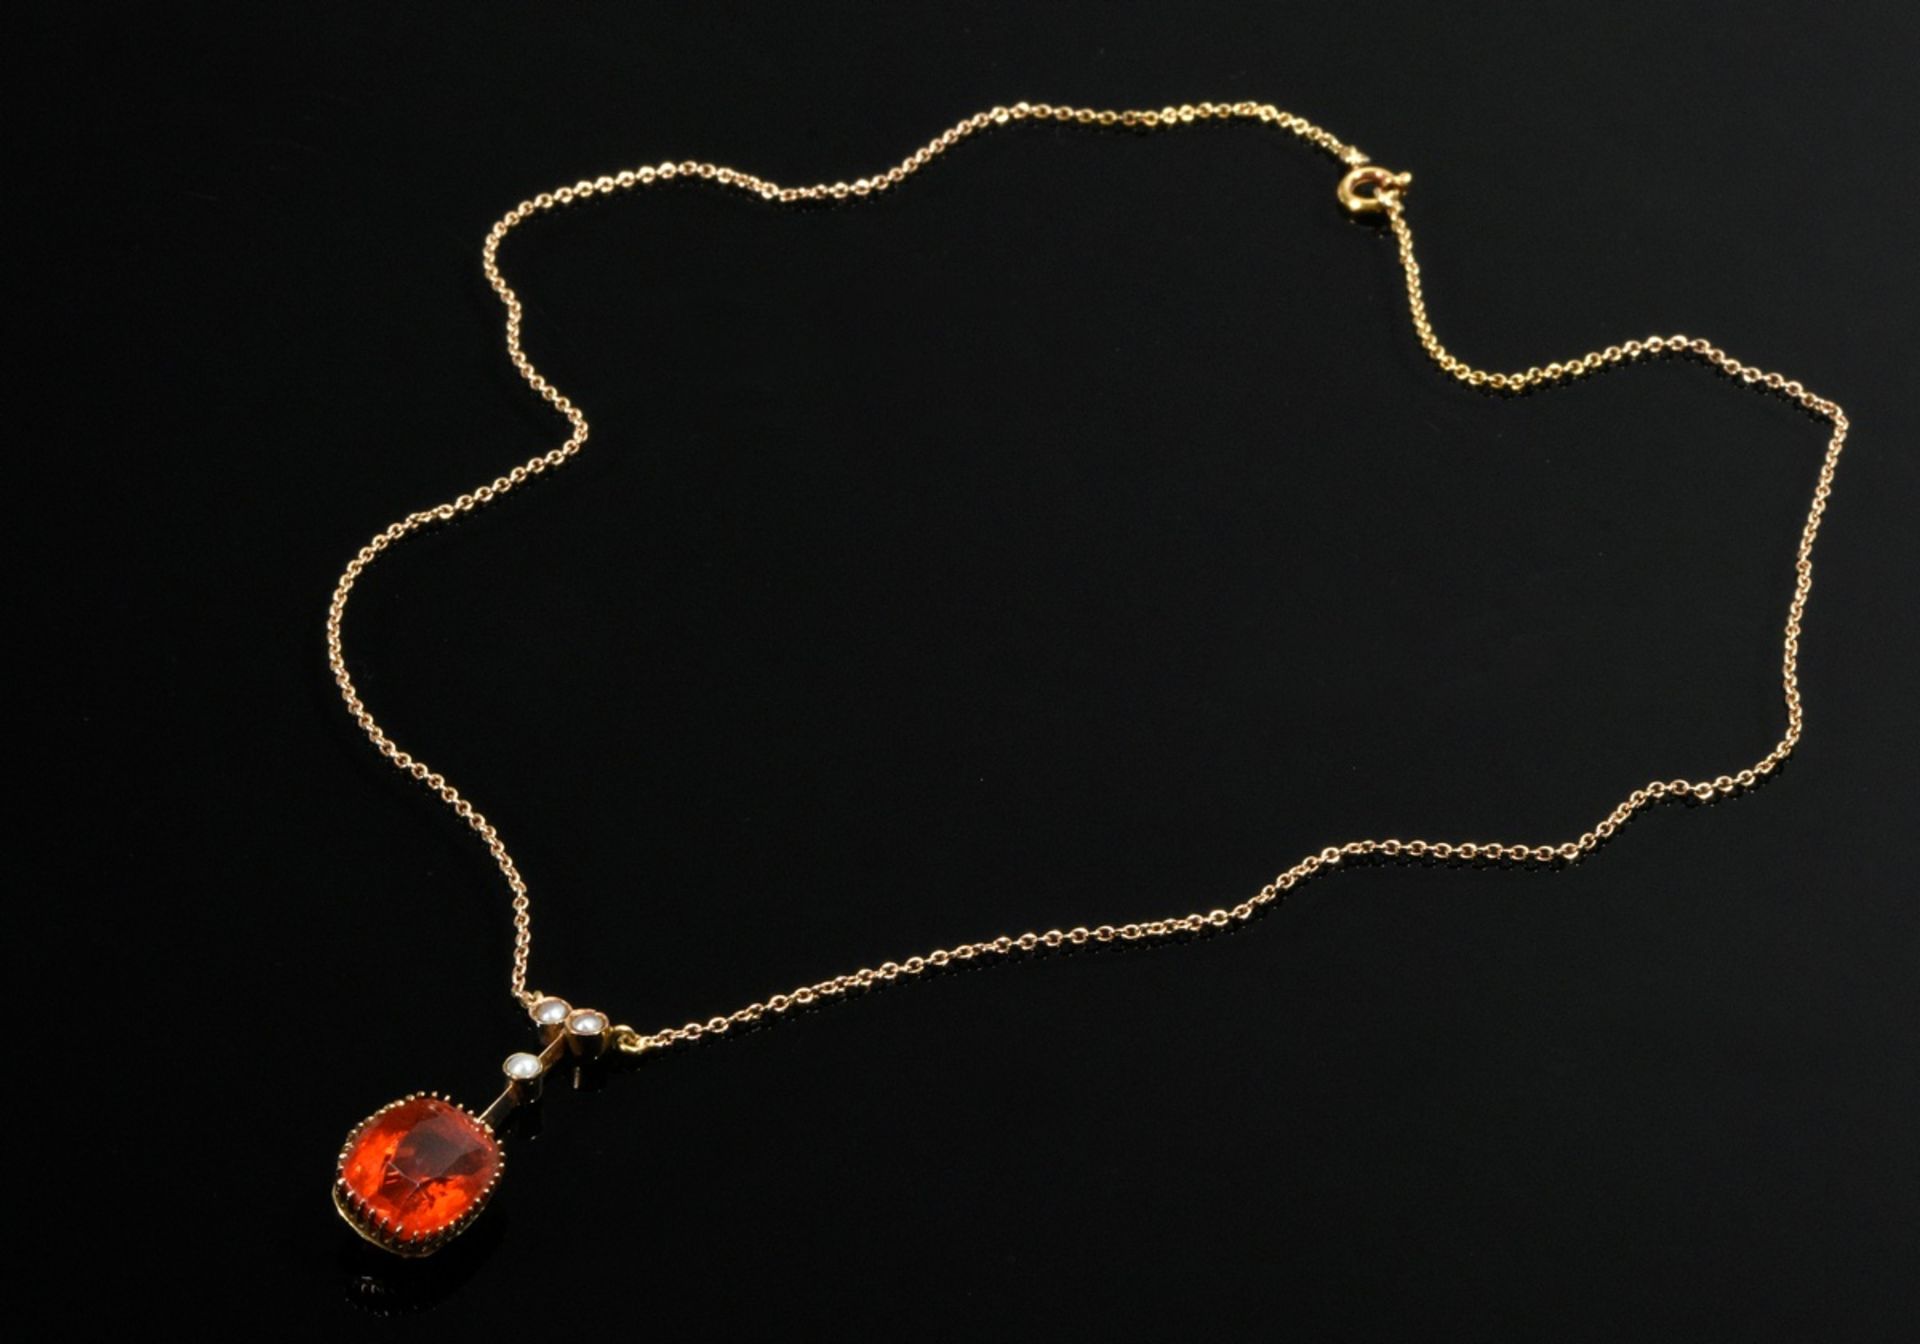 Delicate rose gold 585 necklace with fire opal bar pendant (approx. 5ct, l. 3cm) and small seed pea - Image 2 of 3